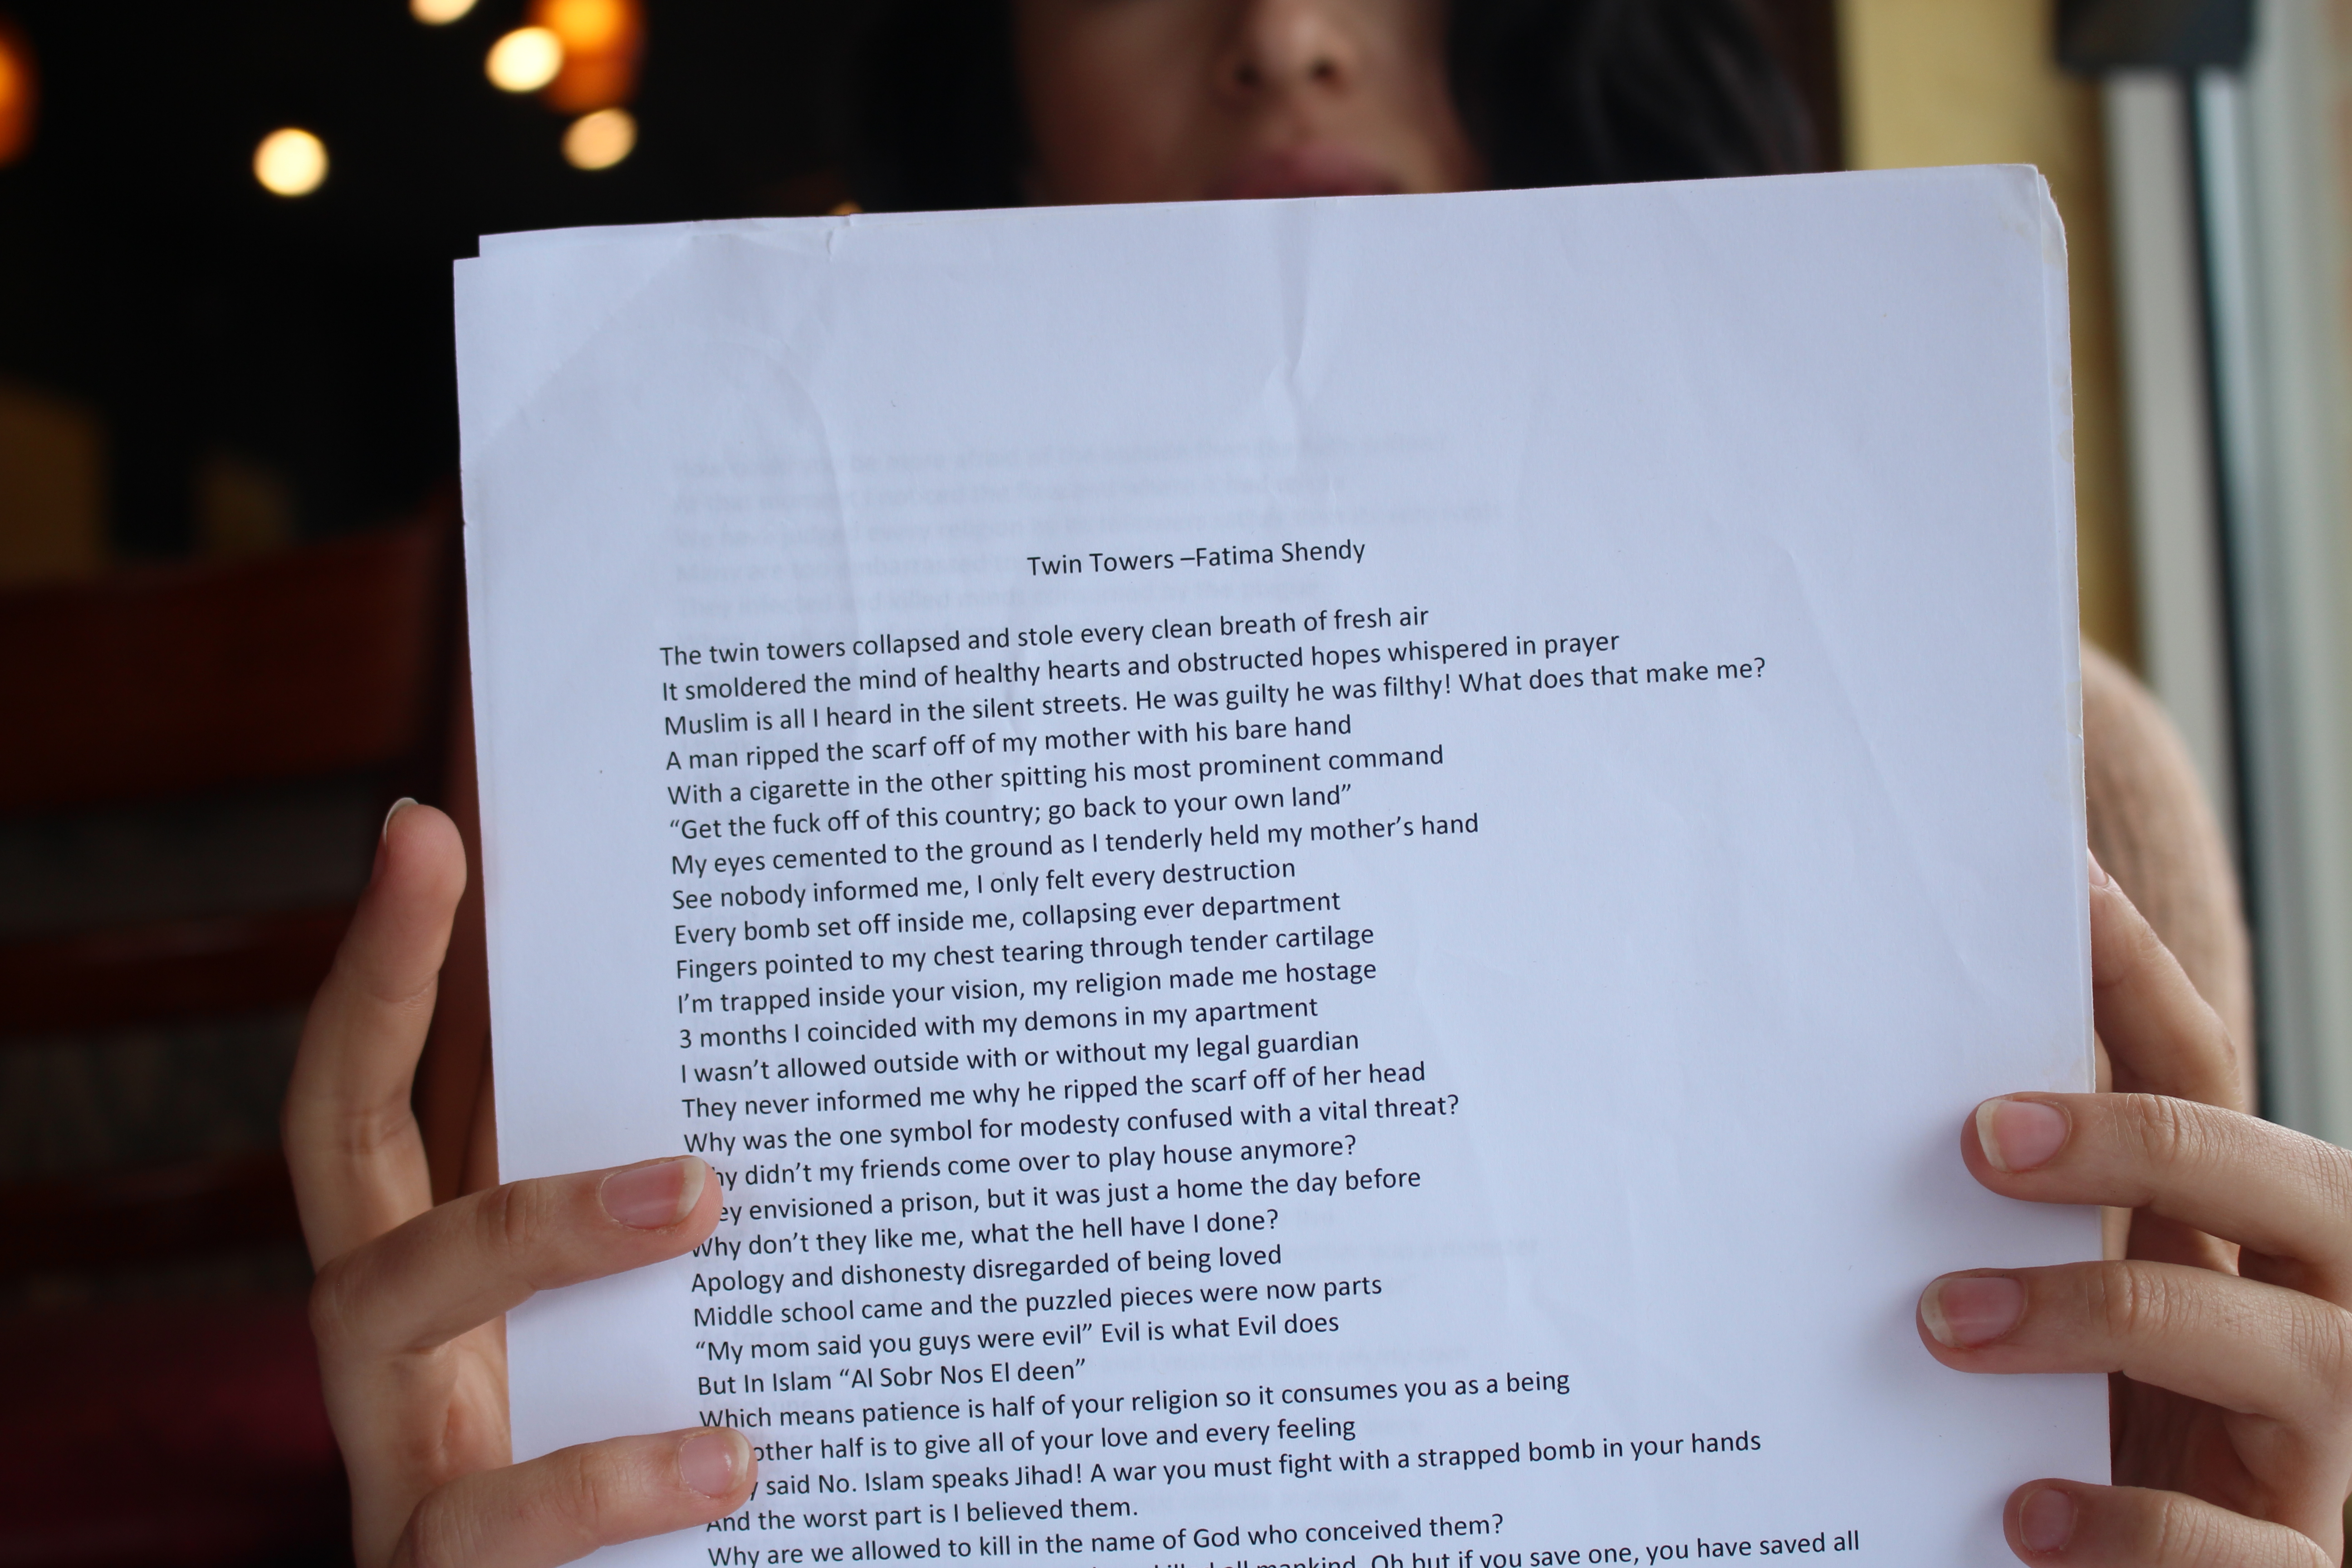 22-year-old Fatima Shendy holds up her poem titled “Twin Towers,” which she performed around a small group of people.